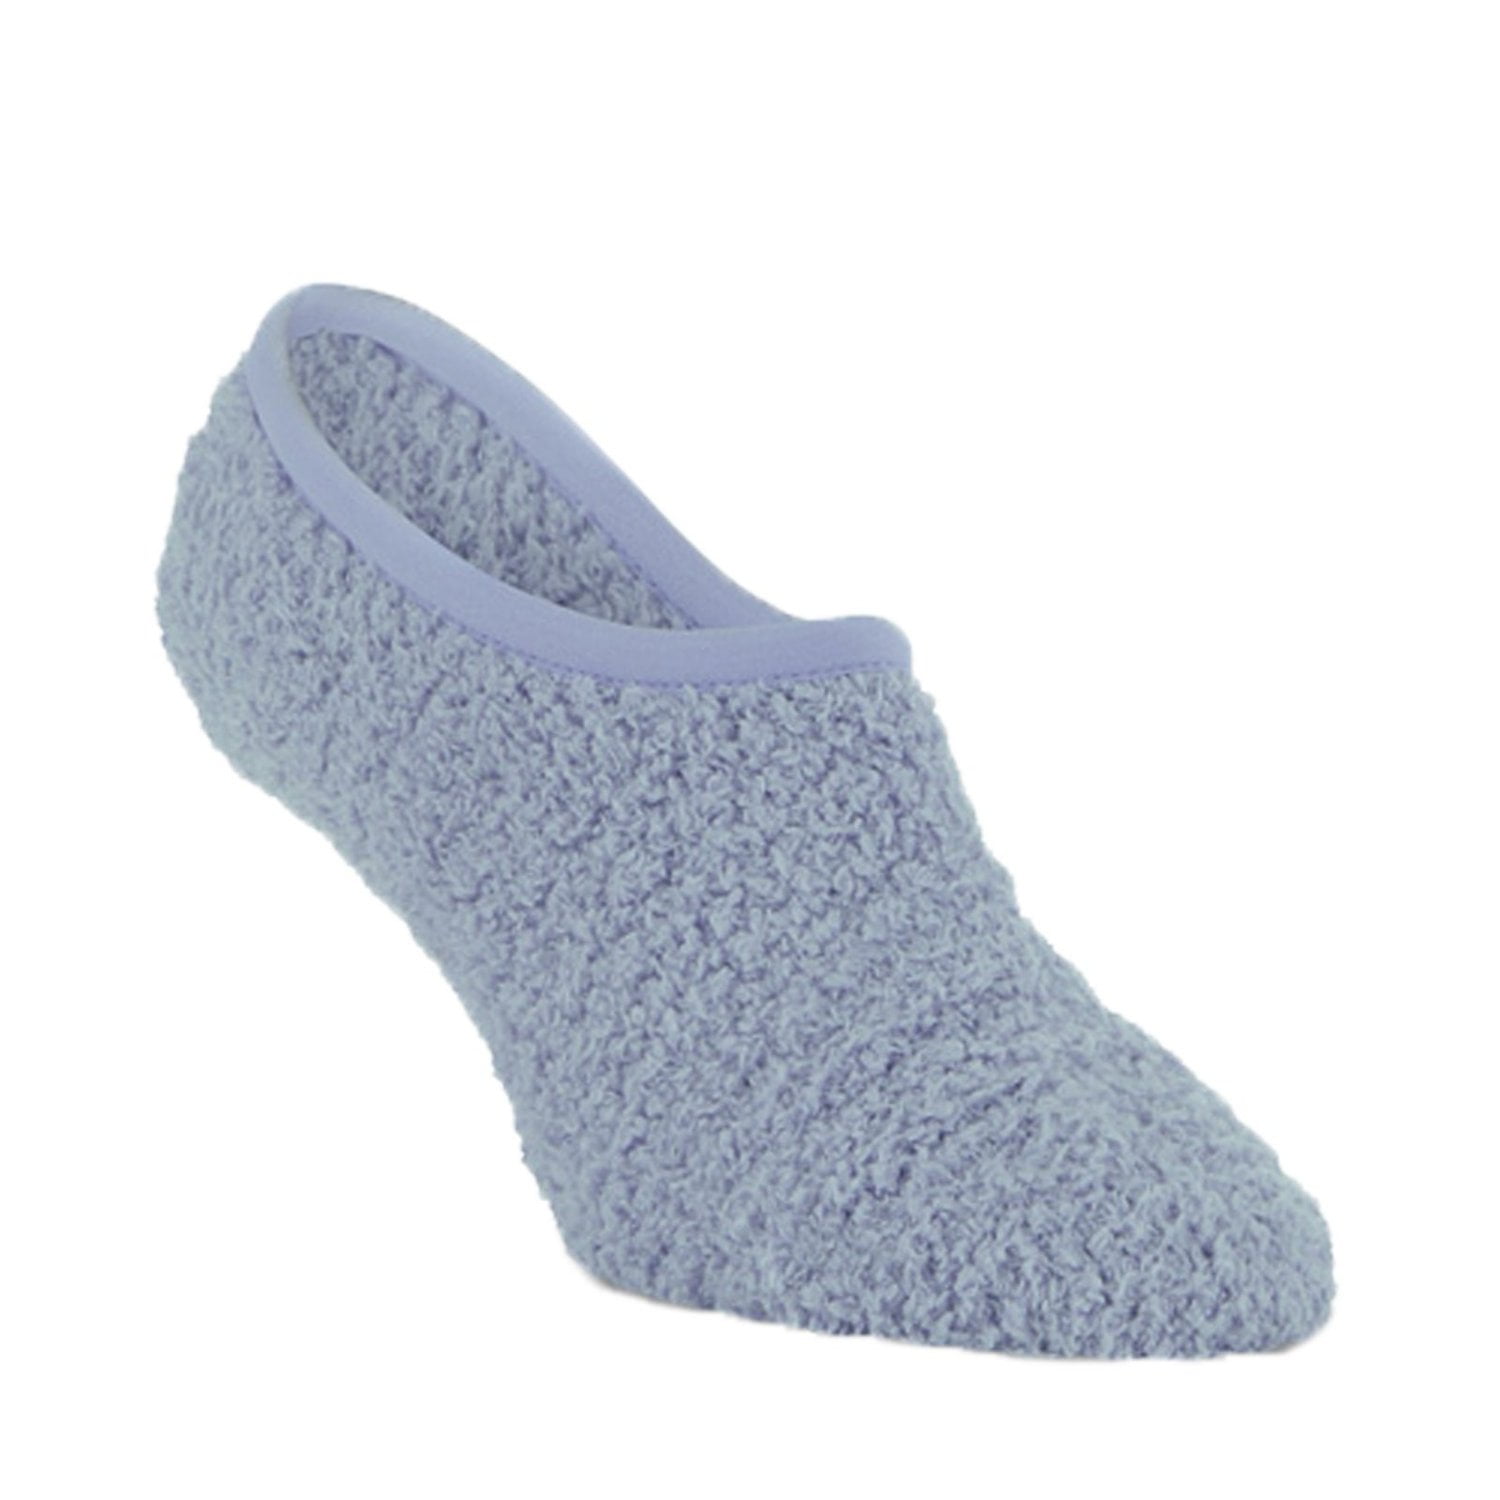 WORLDS SOFTEST SOCKS SPA FOOTSIES WITH GRIPPERS NON SKID NEW AND COZY 